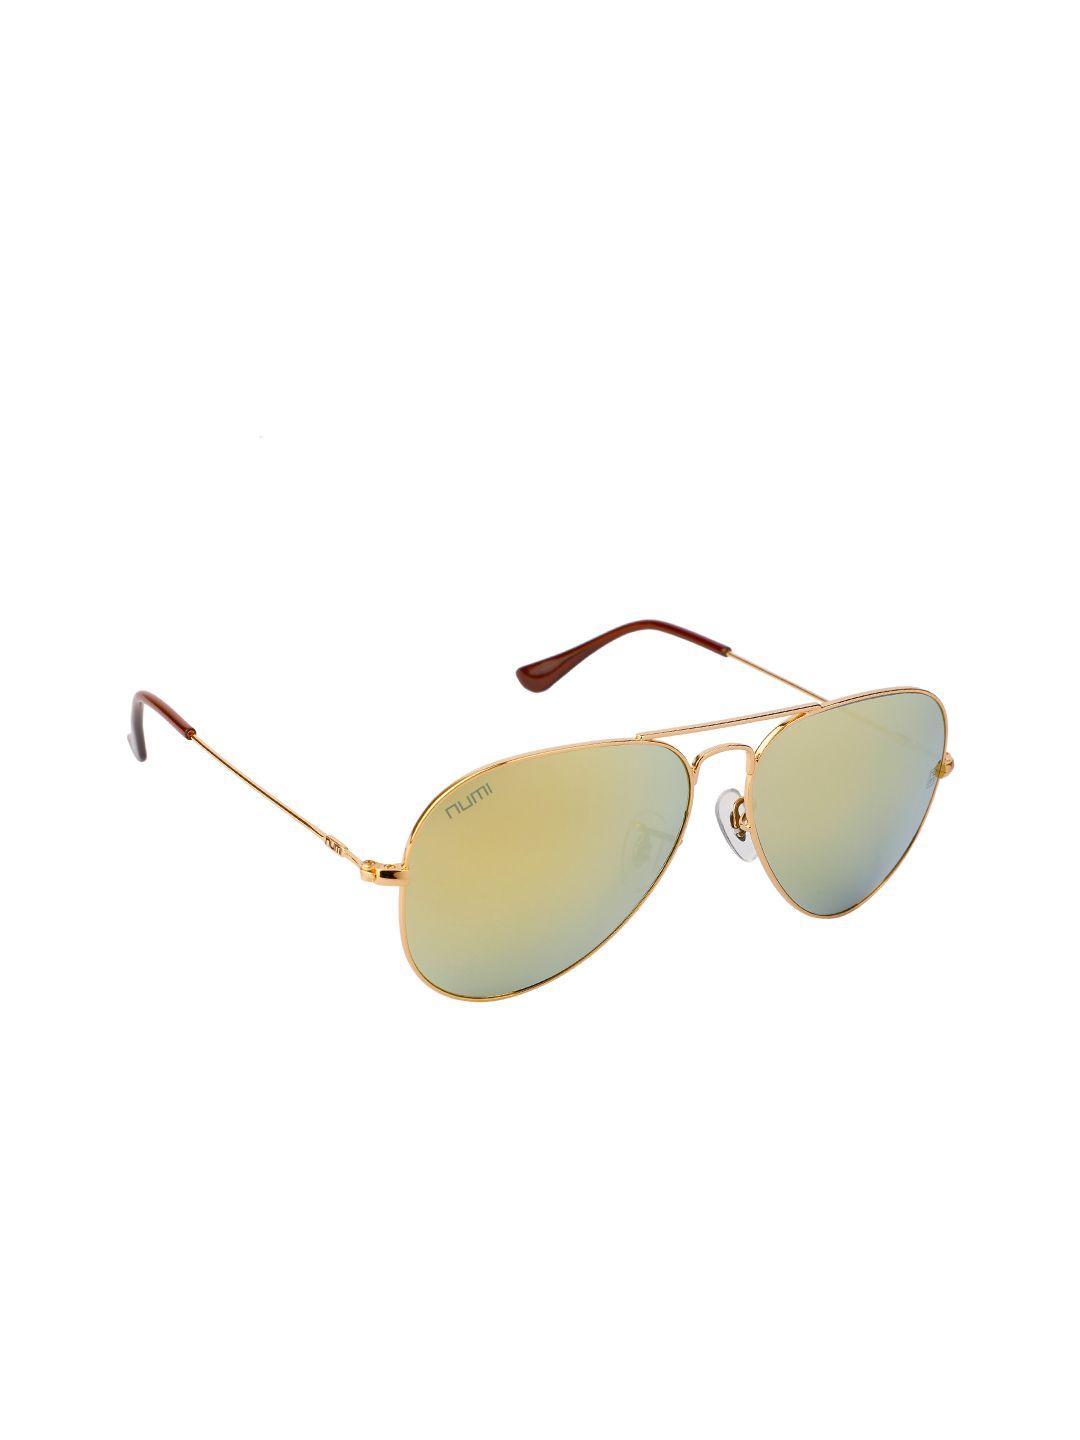 numi unisex gold lens & gold-toned oval sunglasses with uv protected lens - n18146scl3